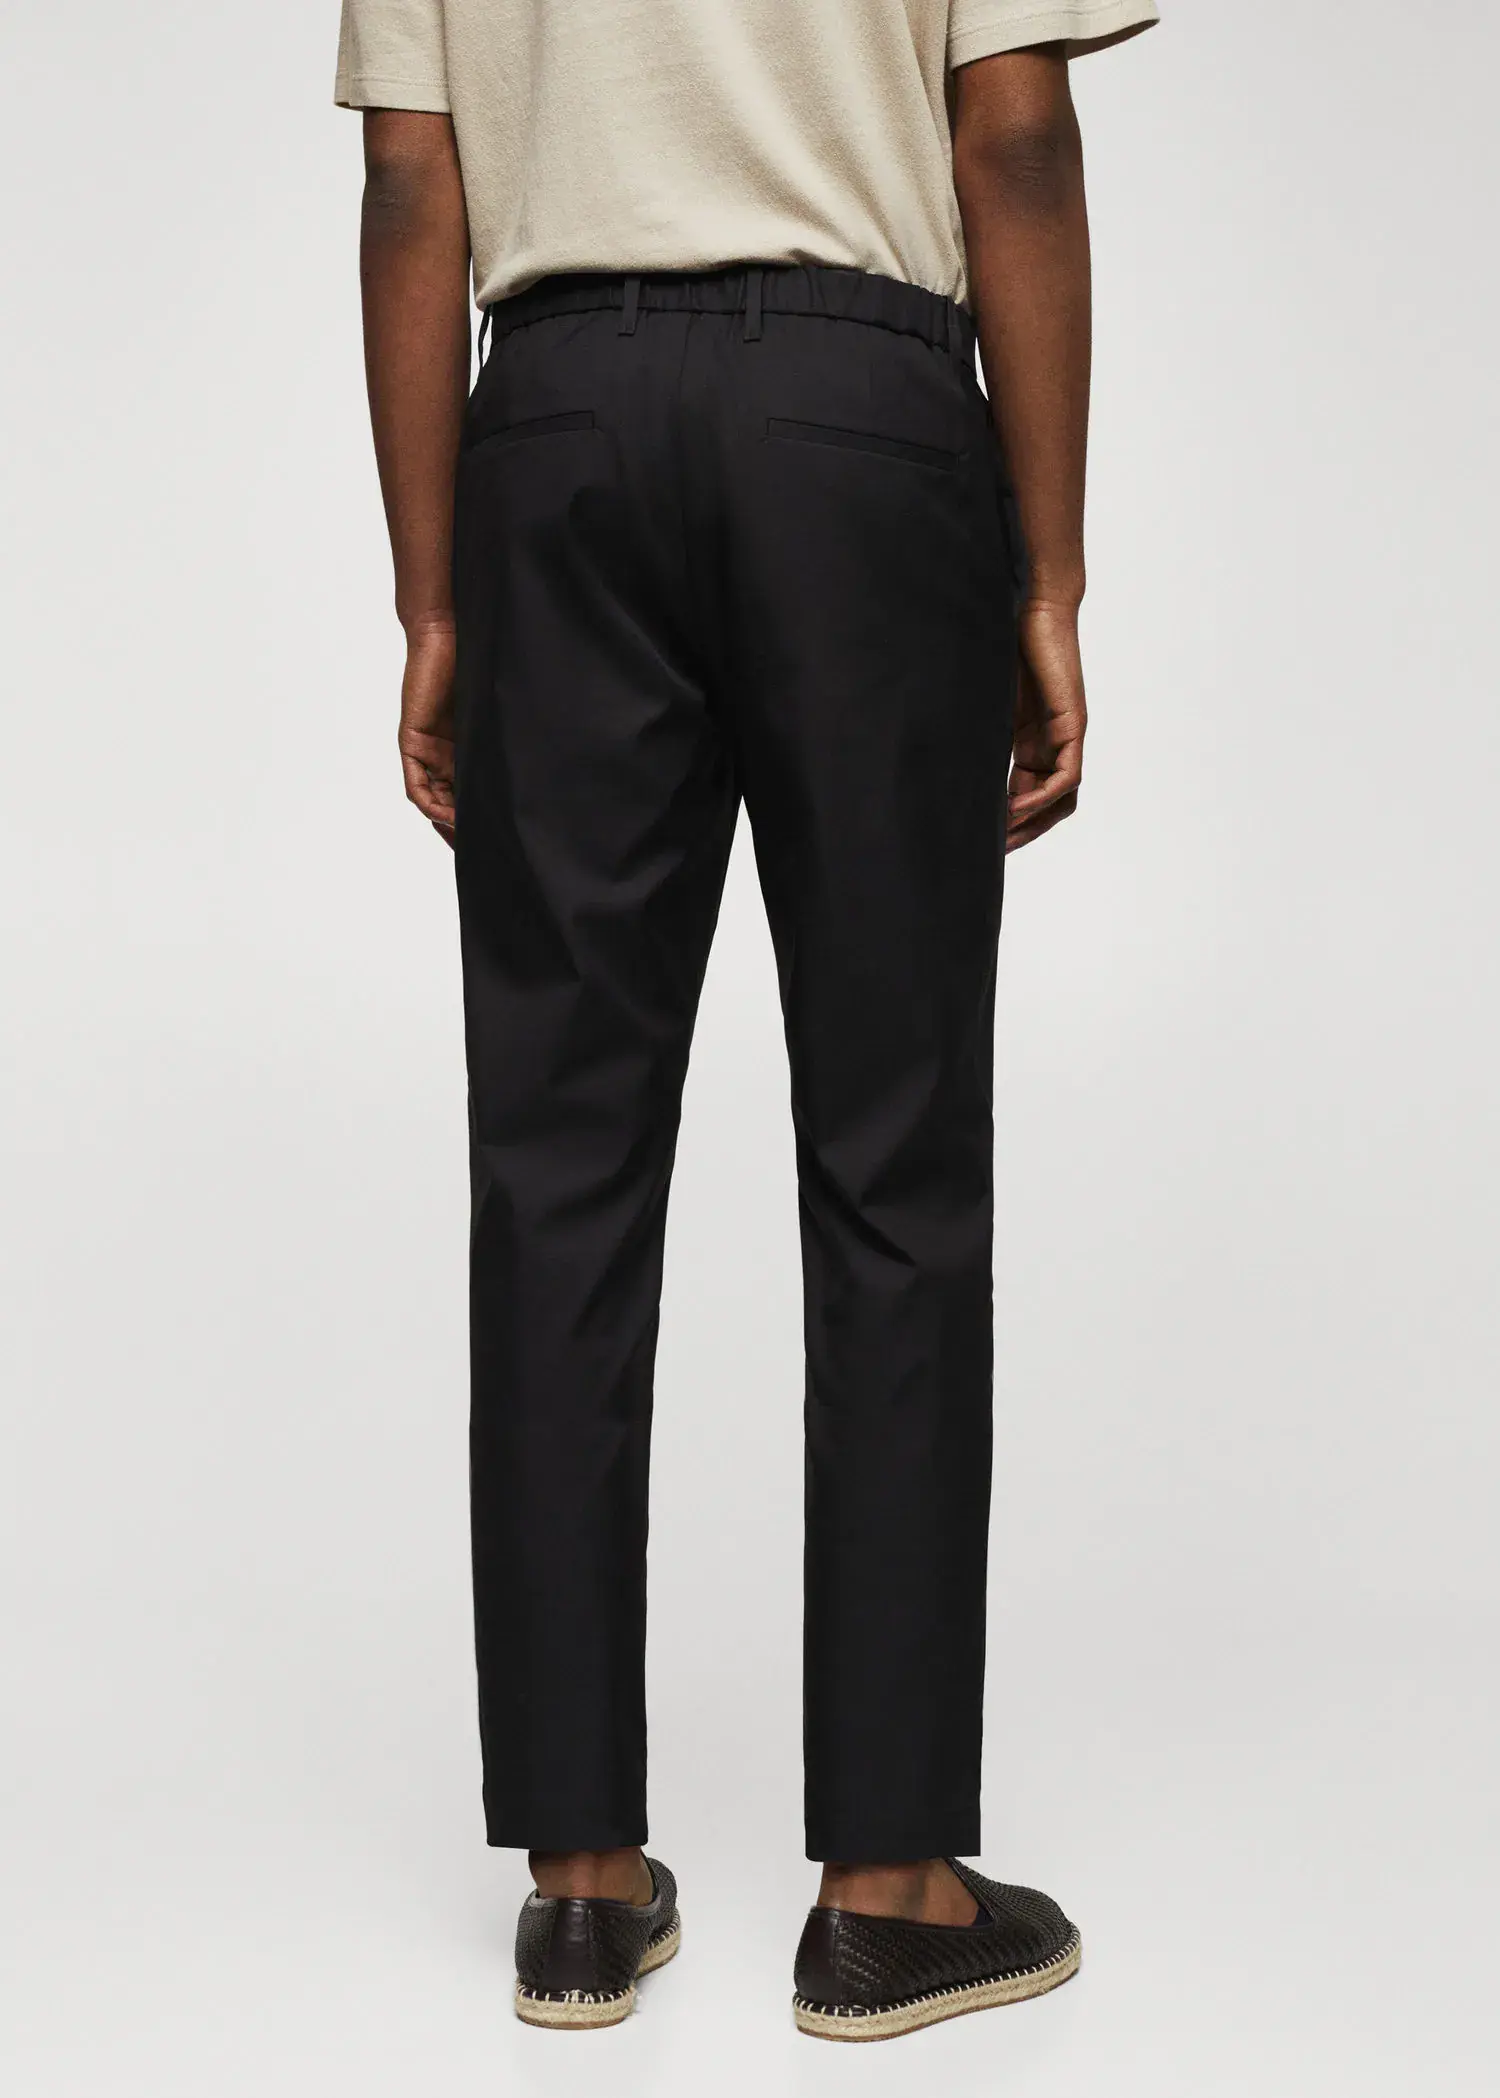 Mango Slim-fit cotton trousers. a person wearing black pants and a white shirt. 